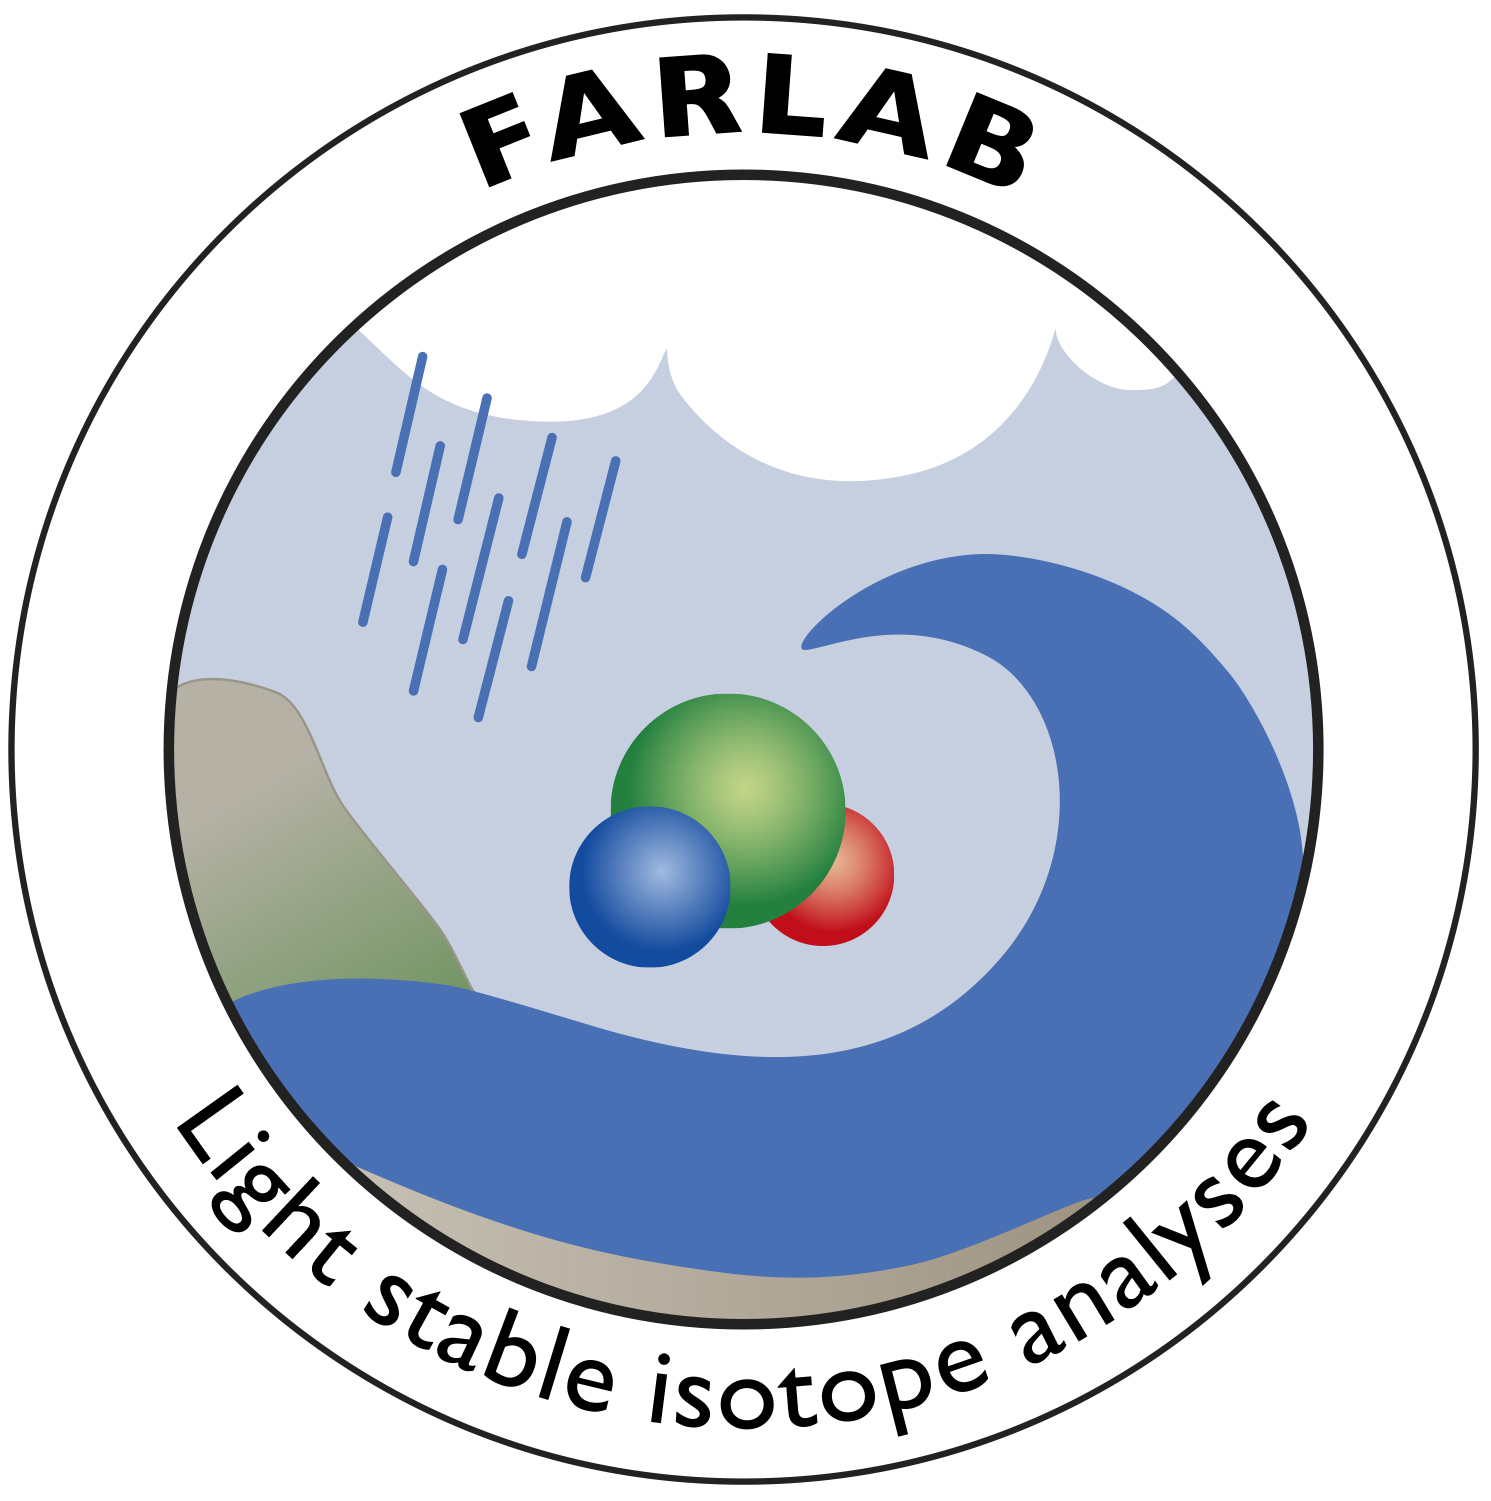 Please enter all details in the fields below to register an analysis request for your samples at FARLAB.